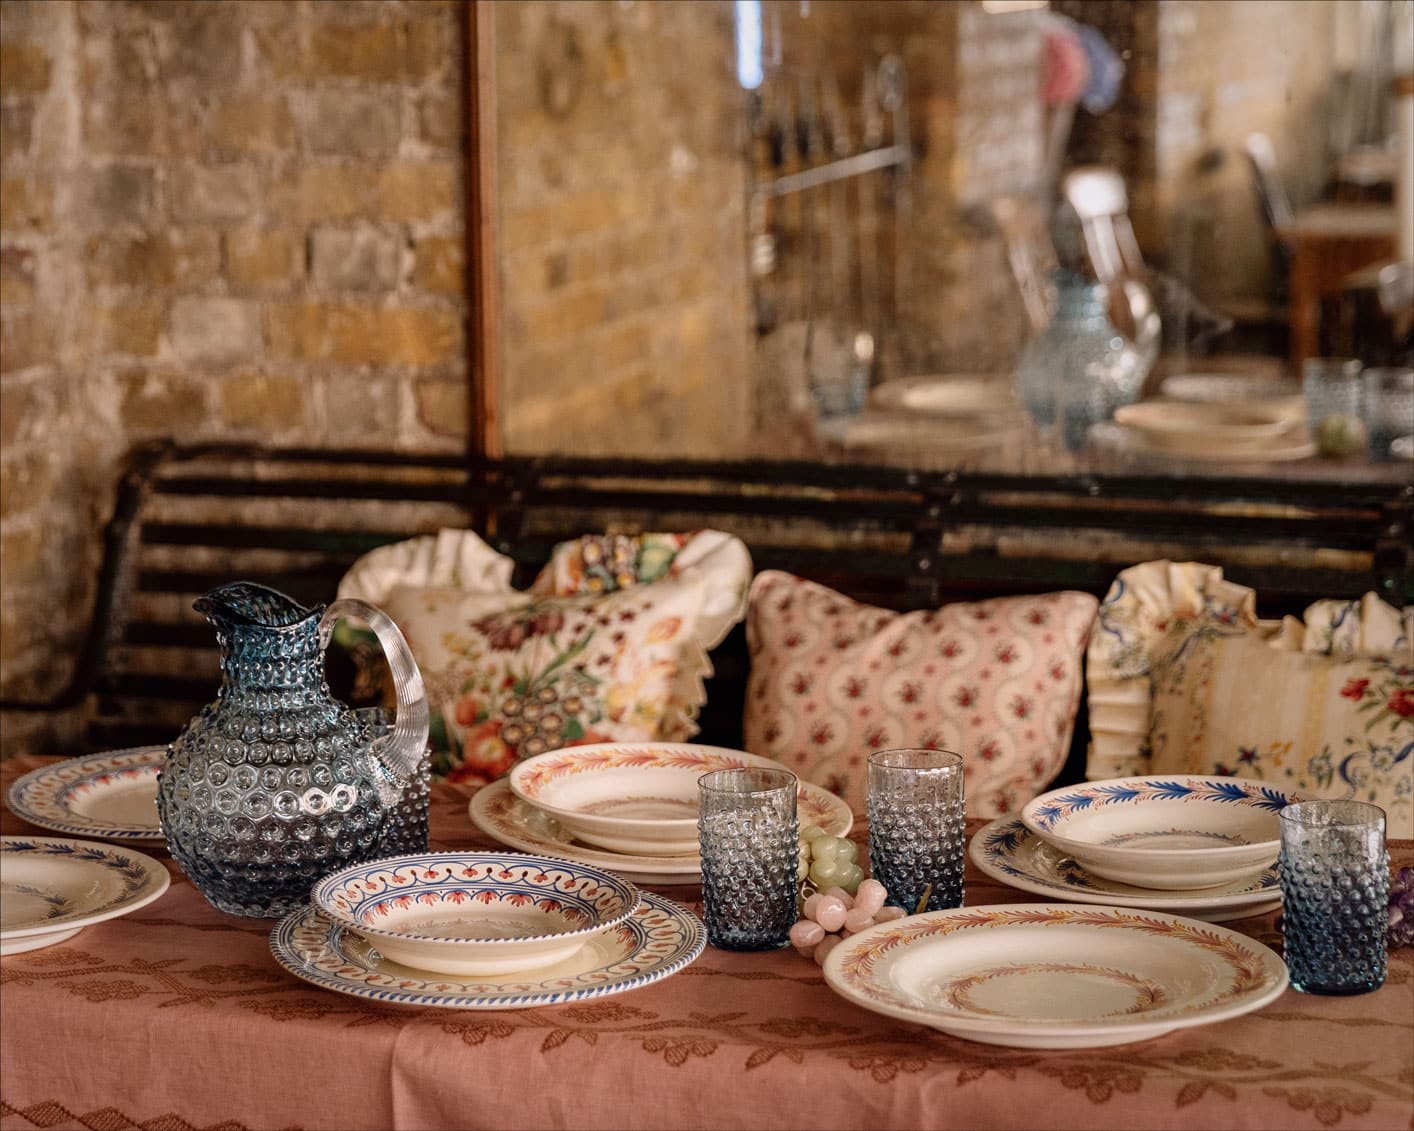 add a Provencal touch to your dinner party